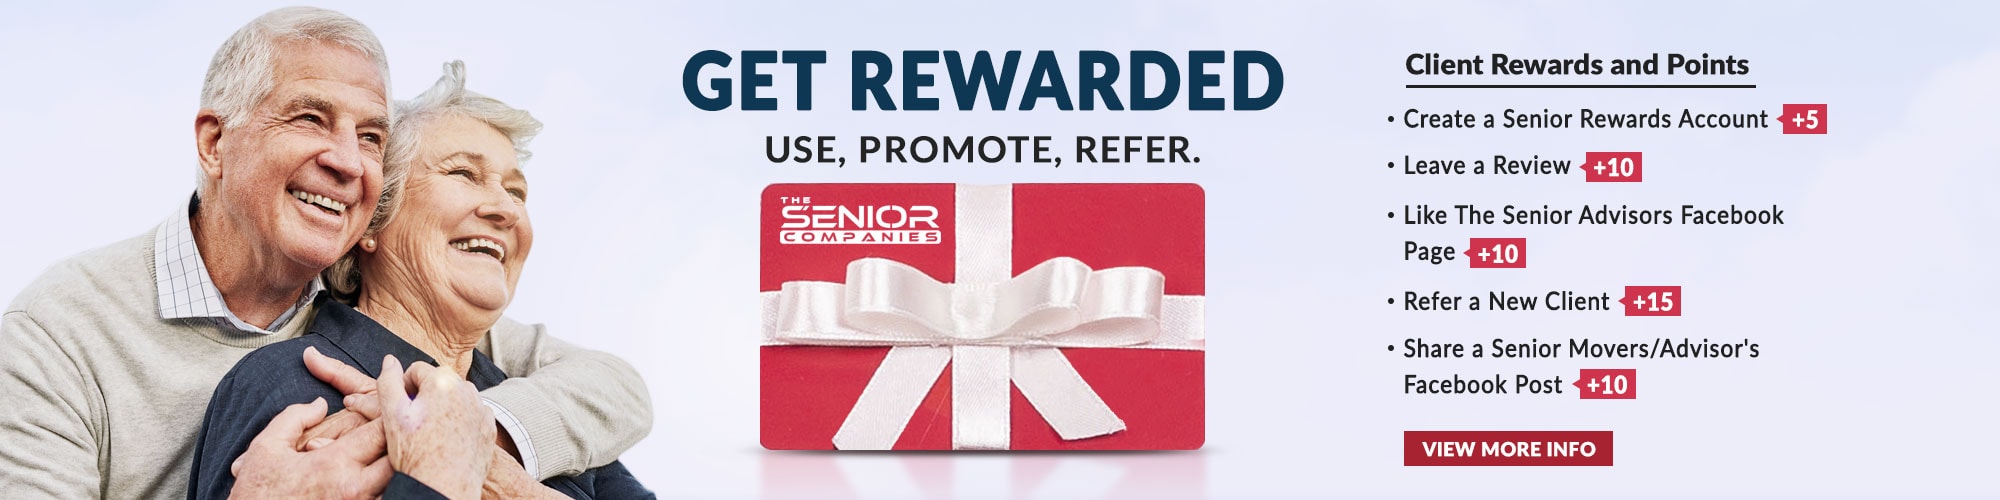 Get Rewarded At The Senior Movers